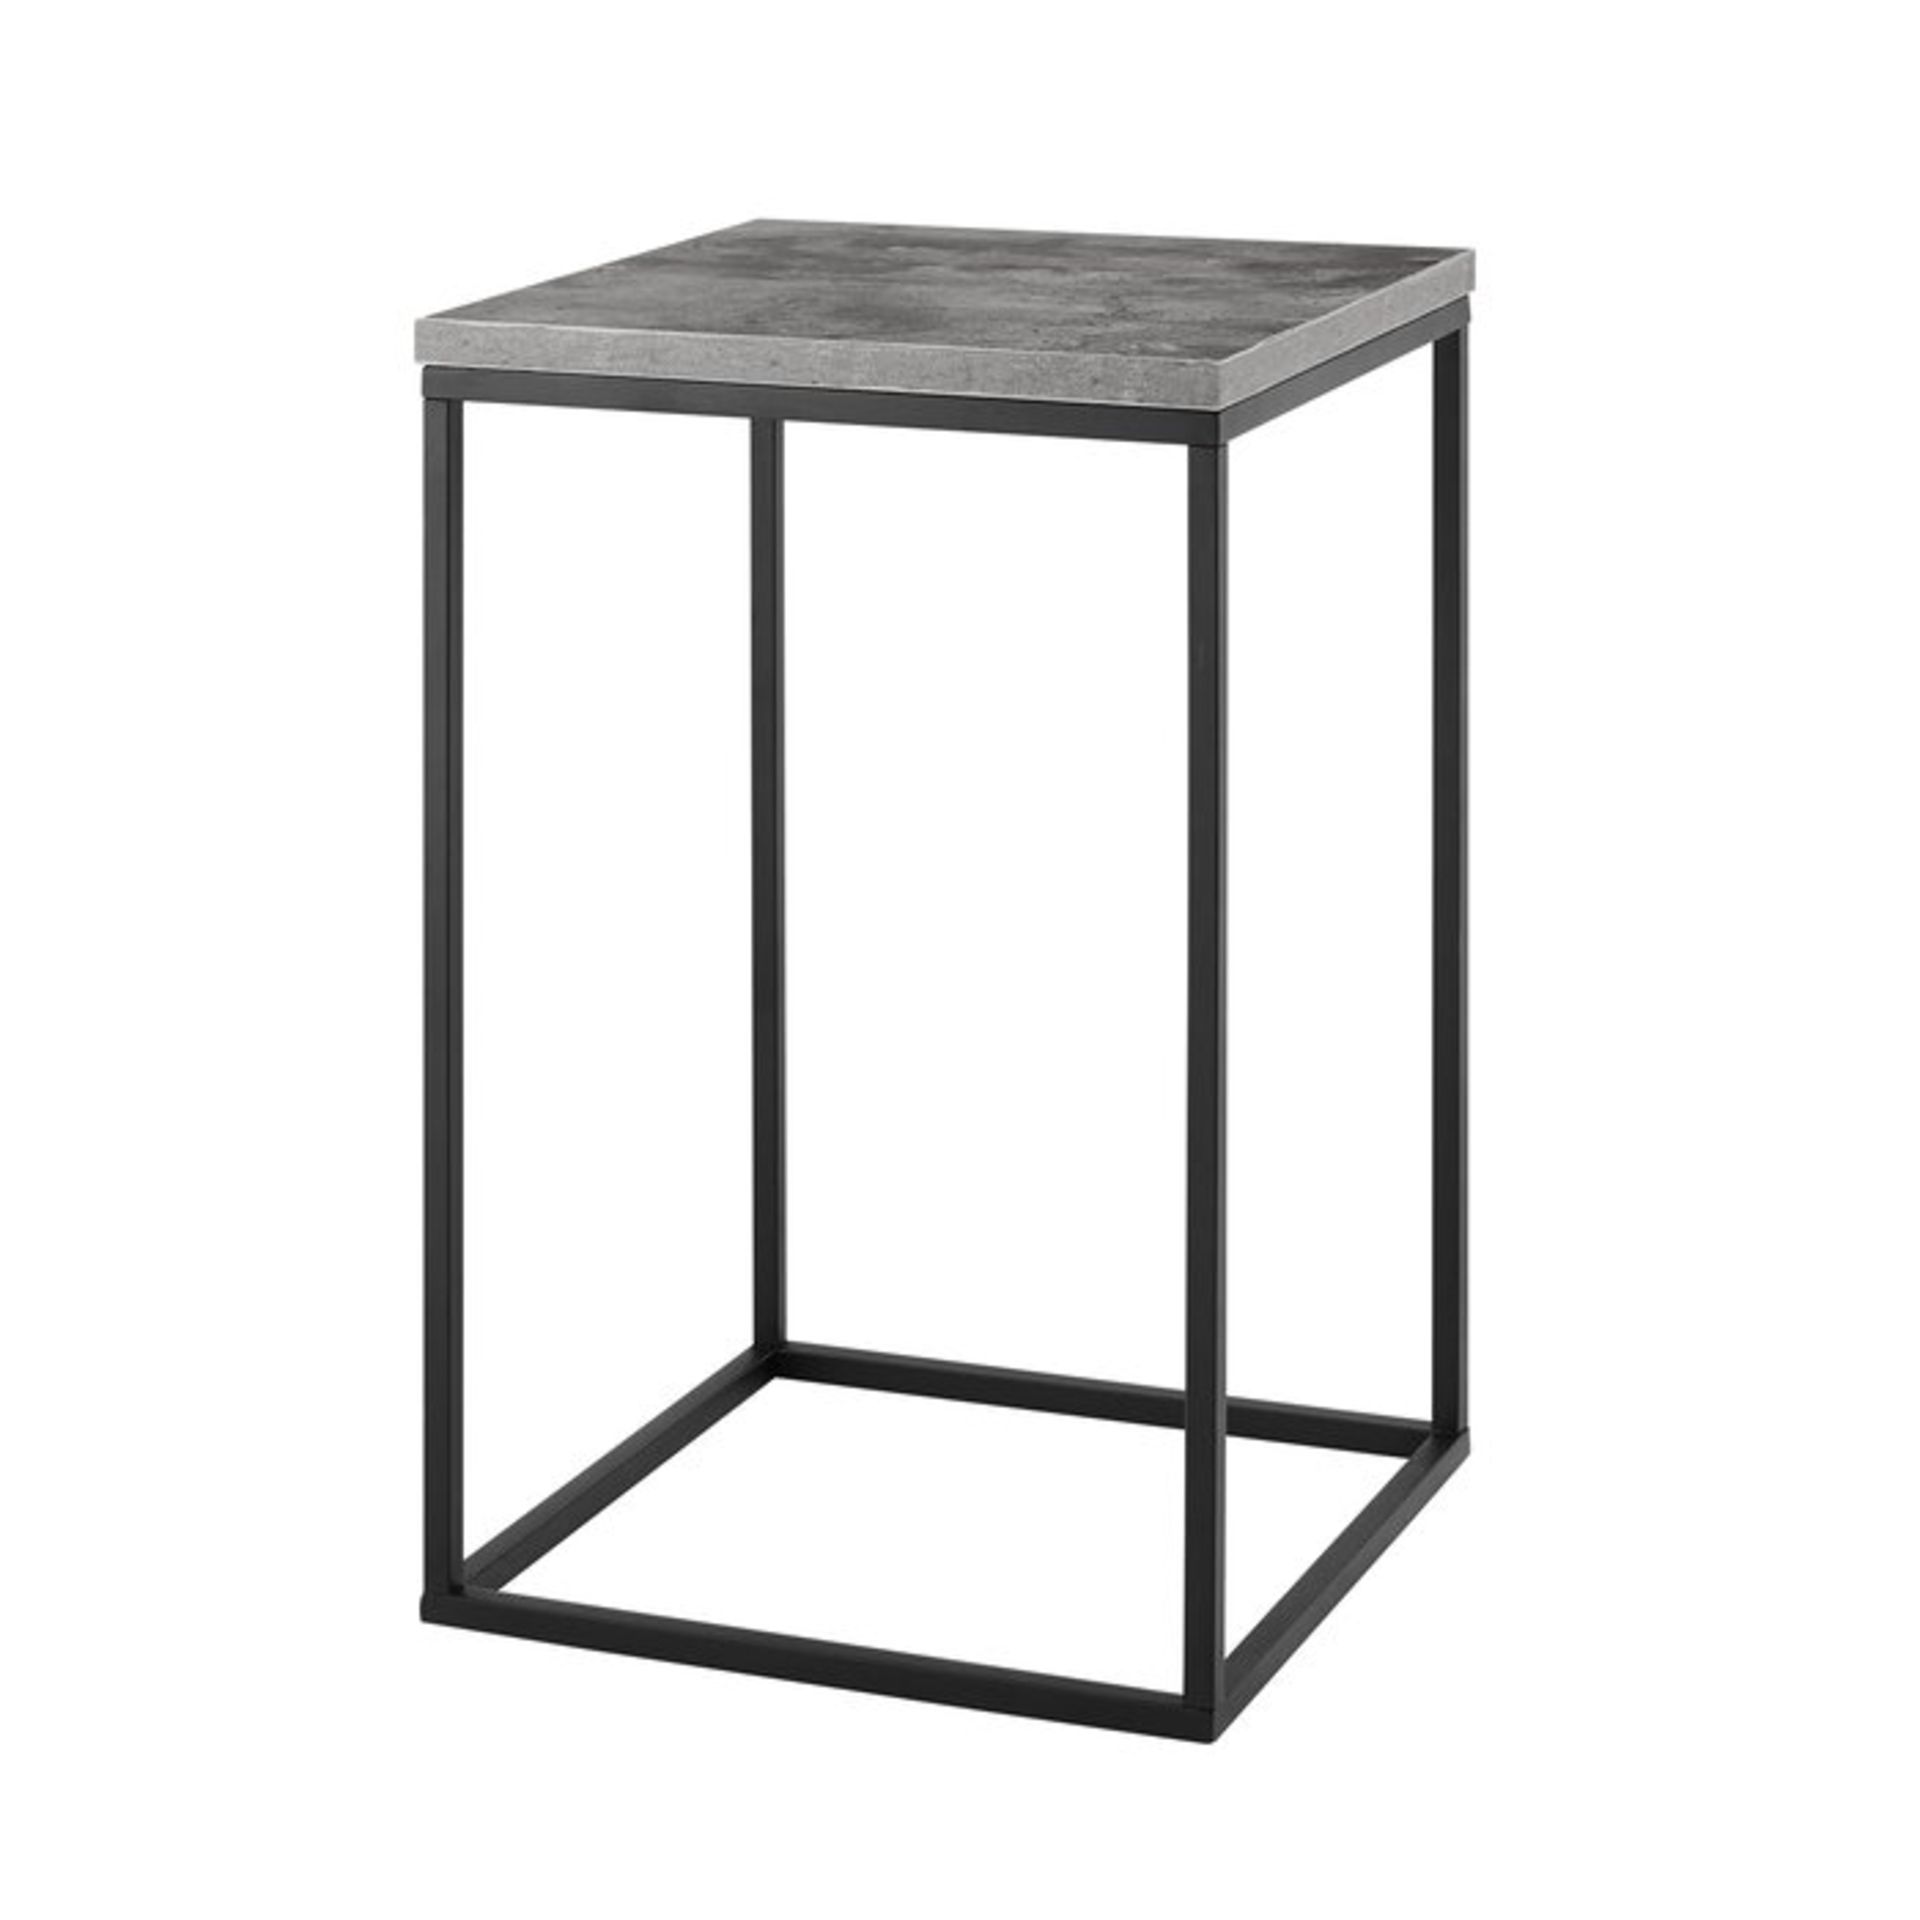 x2 Salvatore Side Table - RRP £77.00 Per Table